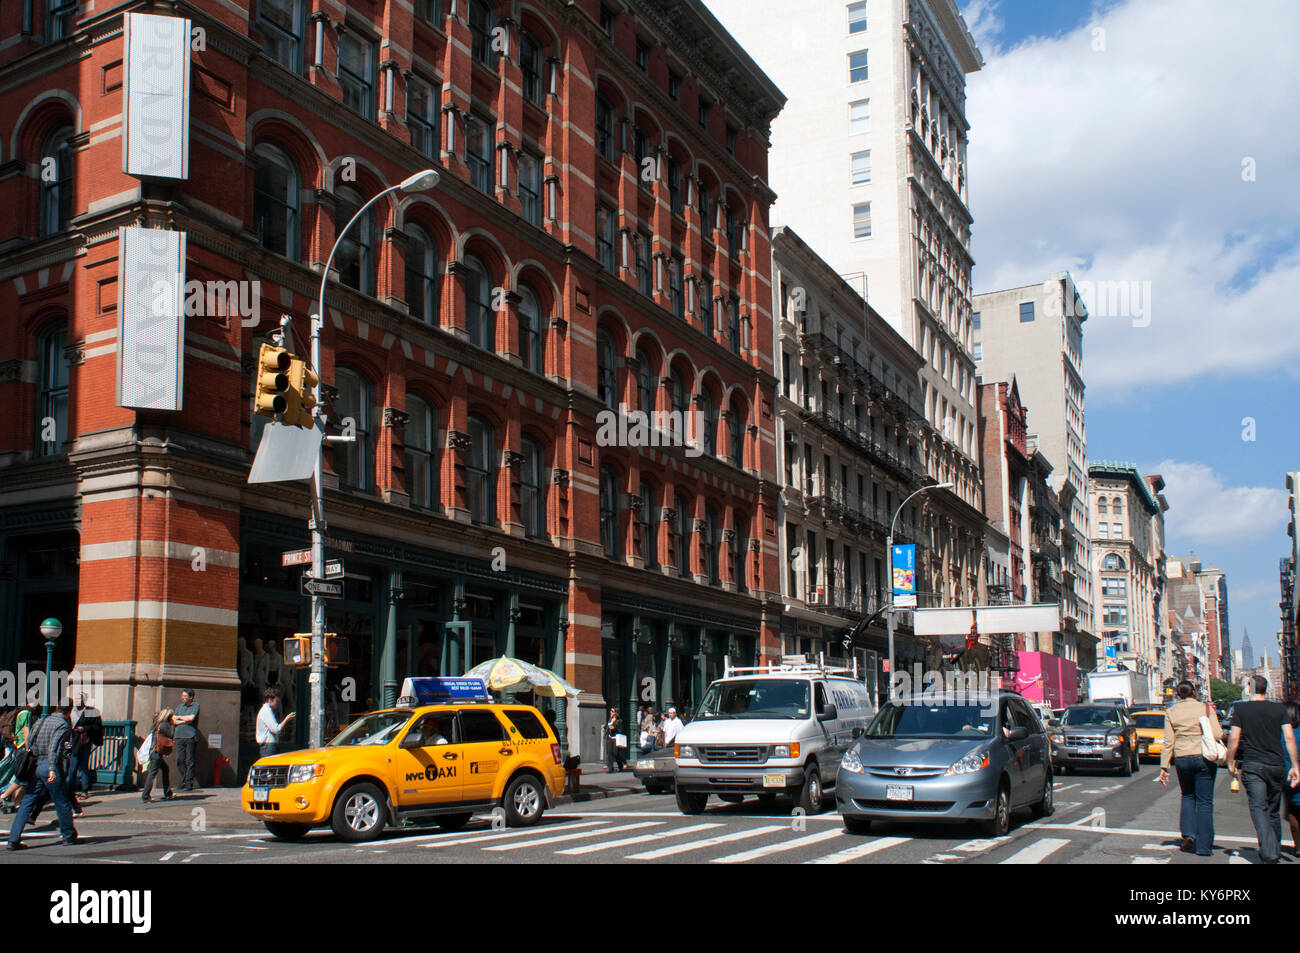 Prada store new york hi-res stock photography and images - Alamy